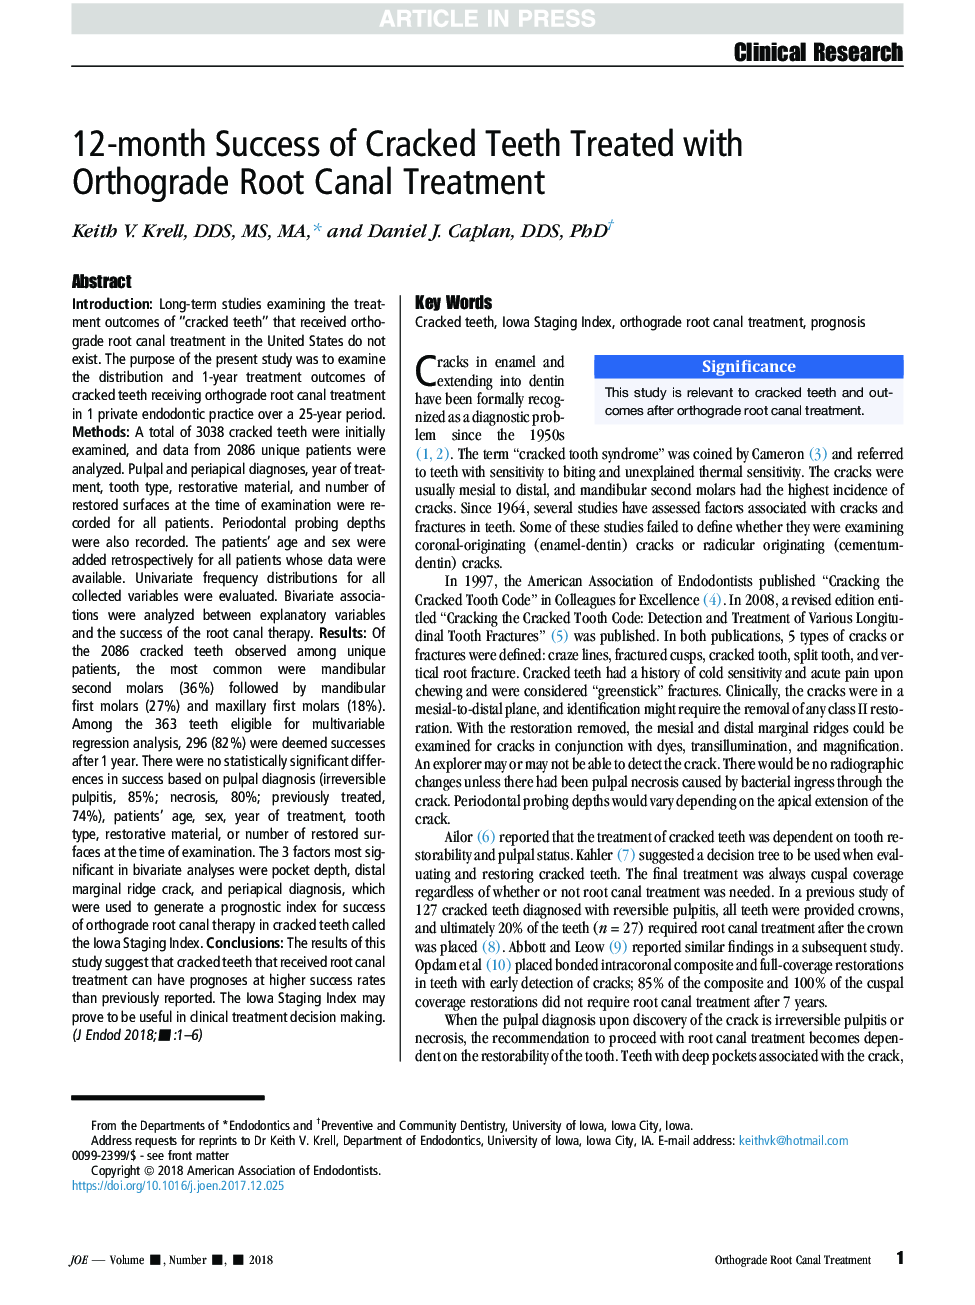 12-month Success of Cracked Teeth Treated with Orthograde Root Canal Treatment